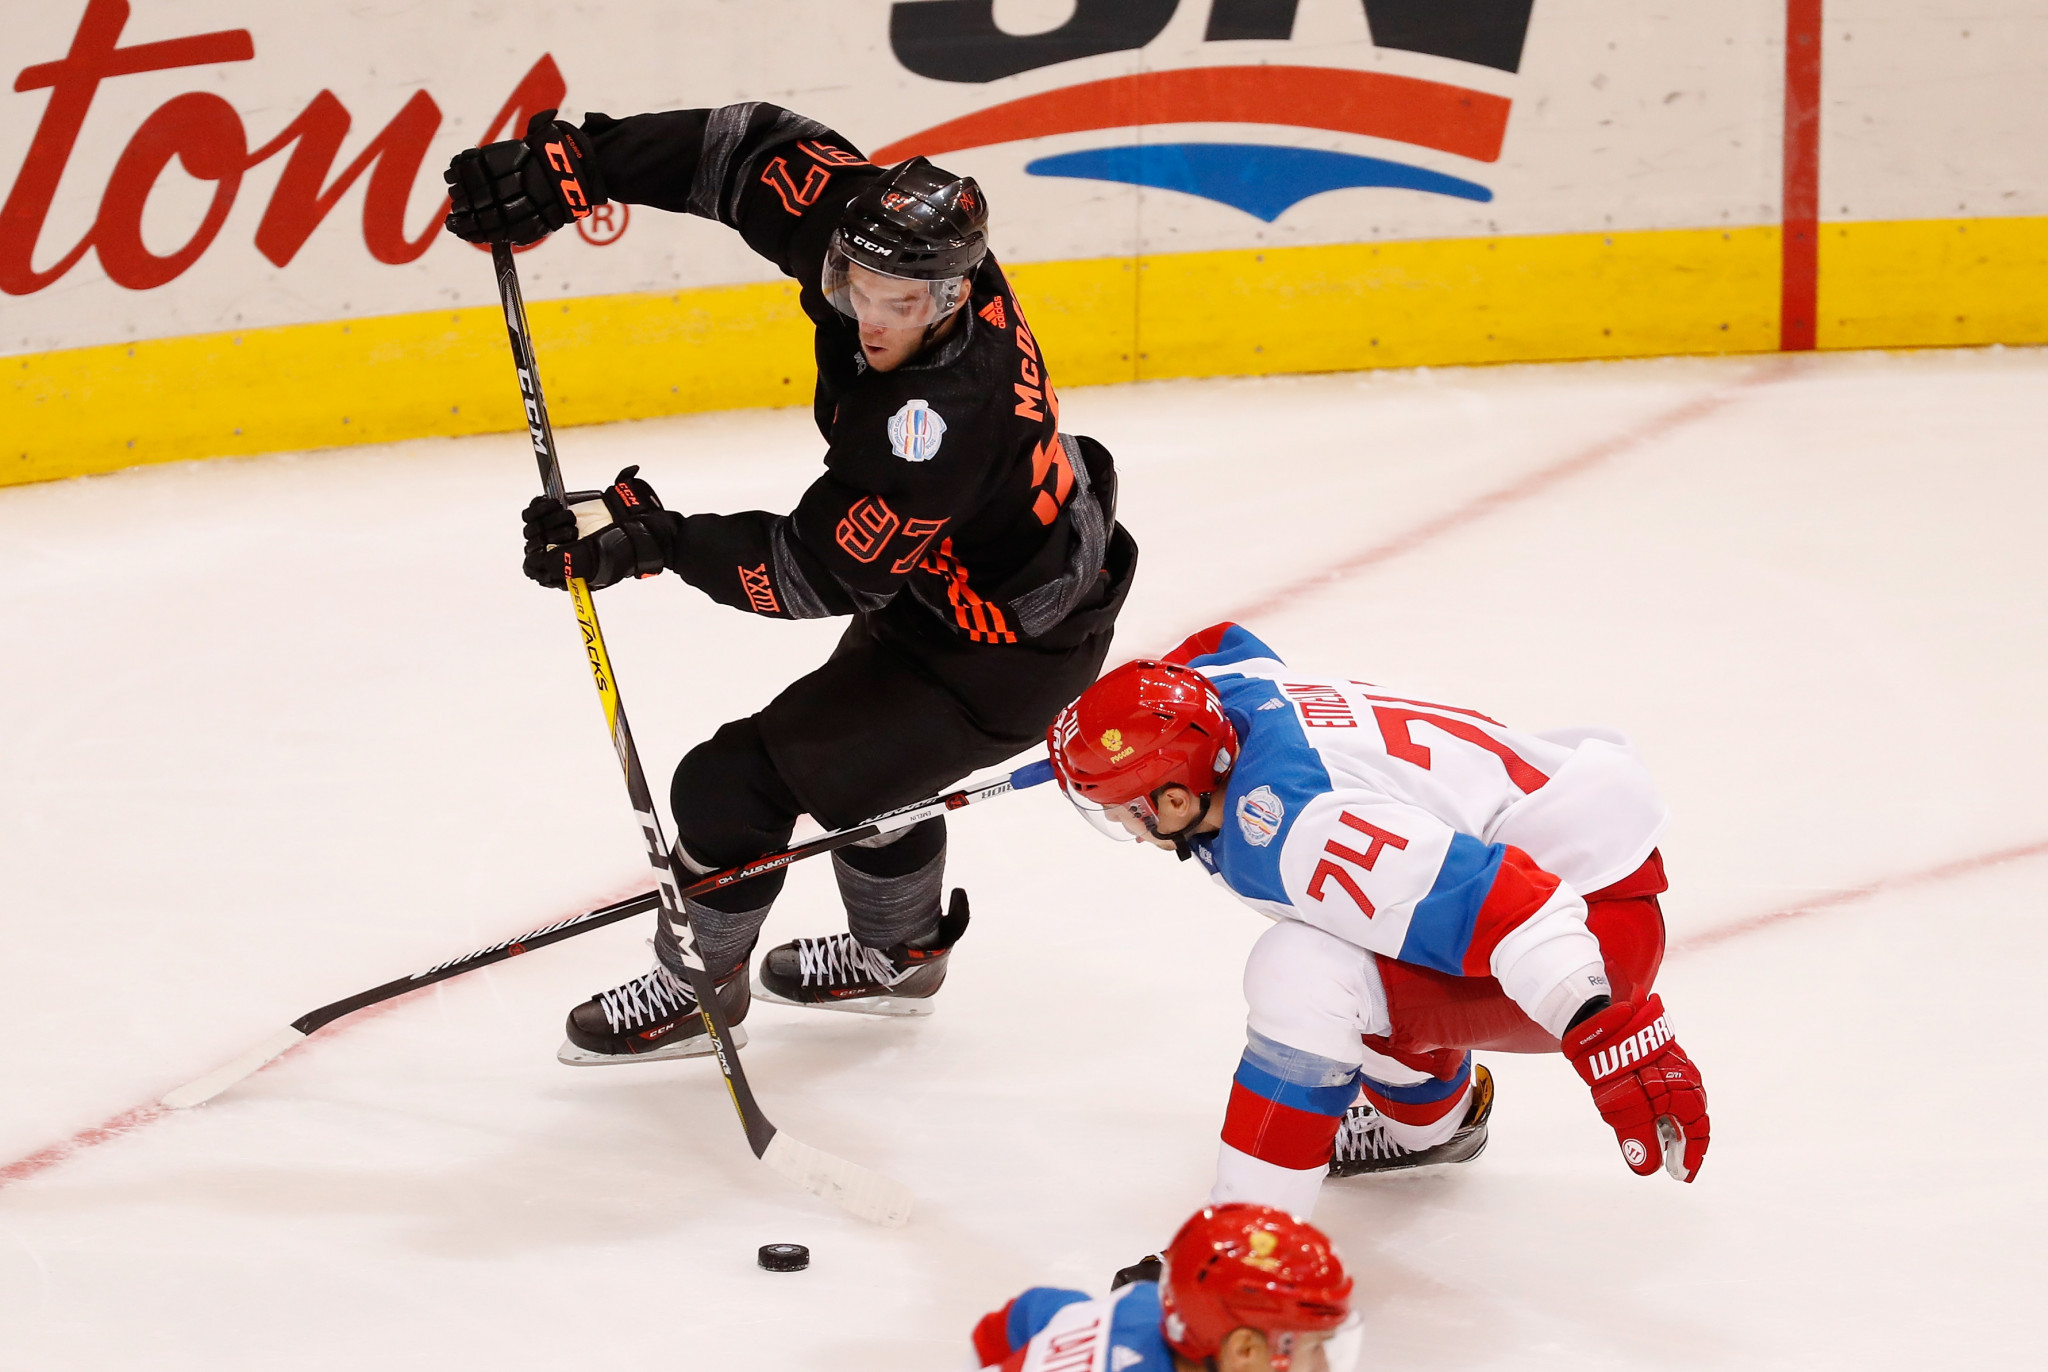 Connor McDavid earned a world title with Canada in 2016 ©Getty Images